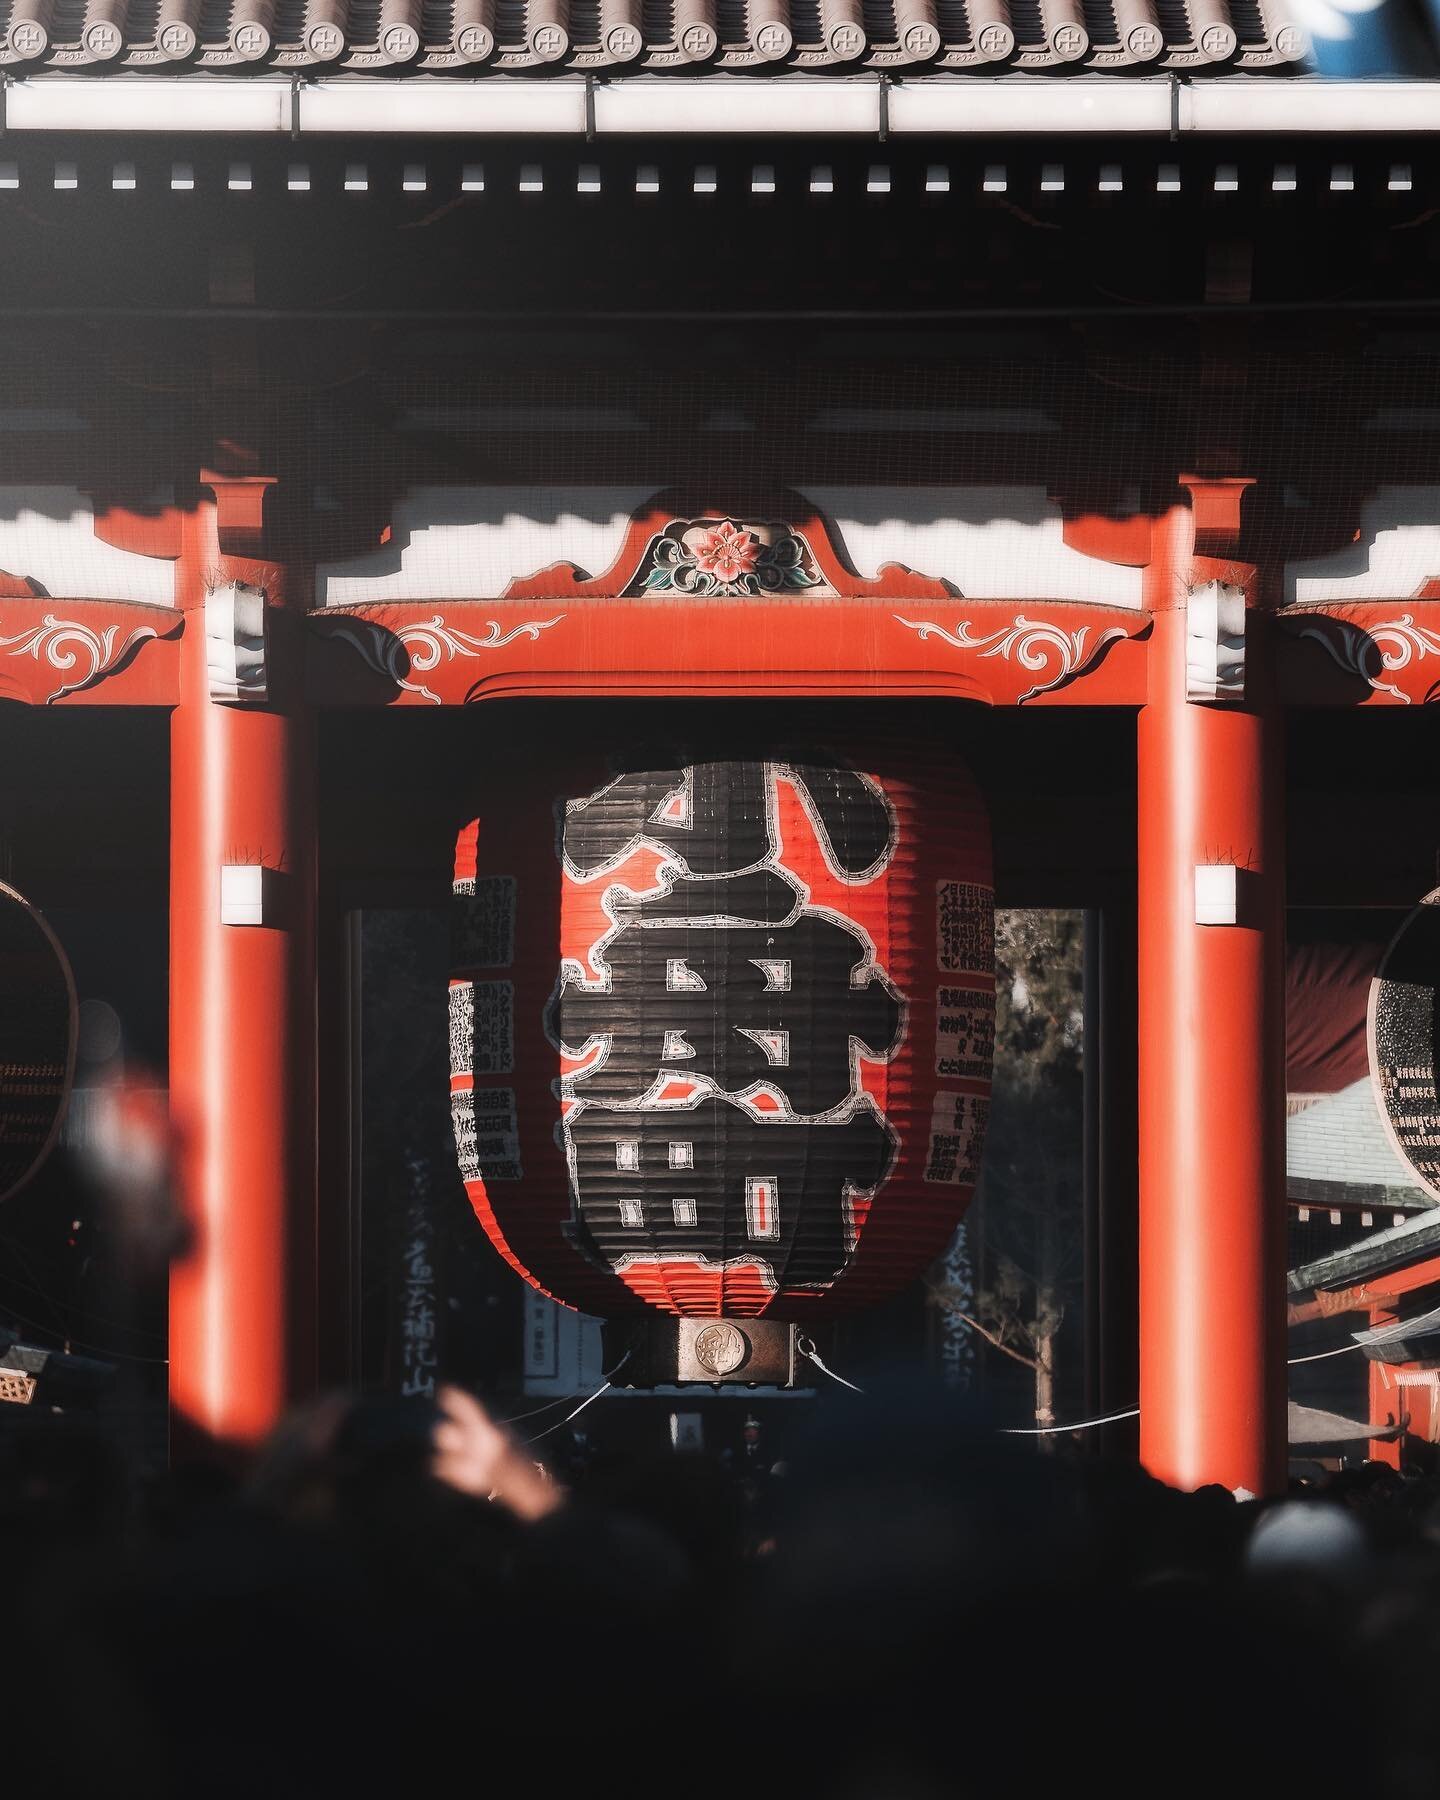 Known as Kaminari-mon (thunder gate), this massive red paper lantern has become a unique symbol for Asakusa and old Tokyo.

Be sure to take a peek underneath the lantern for a fierce surprise 🐉. 
.
.
.
.
📍Asakusa《 浅草 》
.
┈︎┈︎┈︎┈︎┈︎┈︎┈︎┈︎┈︎┈┈┈┈︎┈┈︎┈